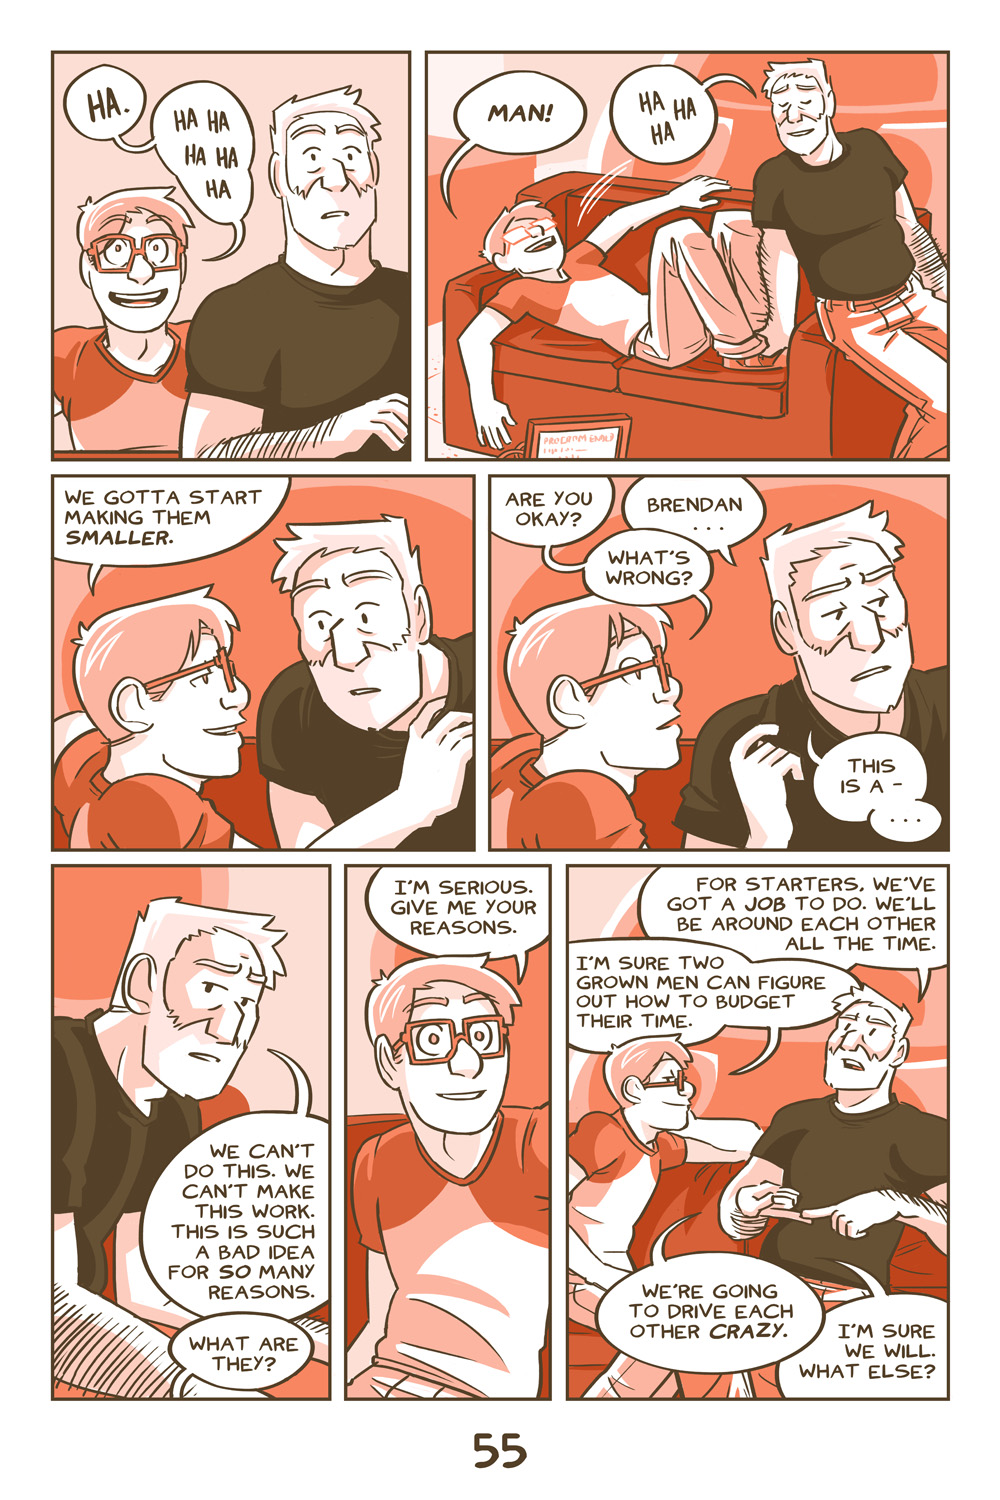 Chapter 2, Page 55